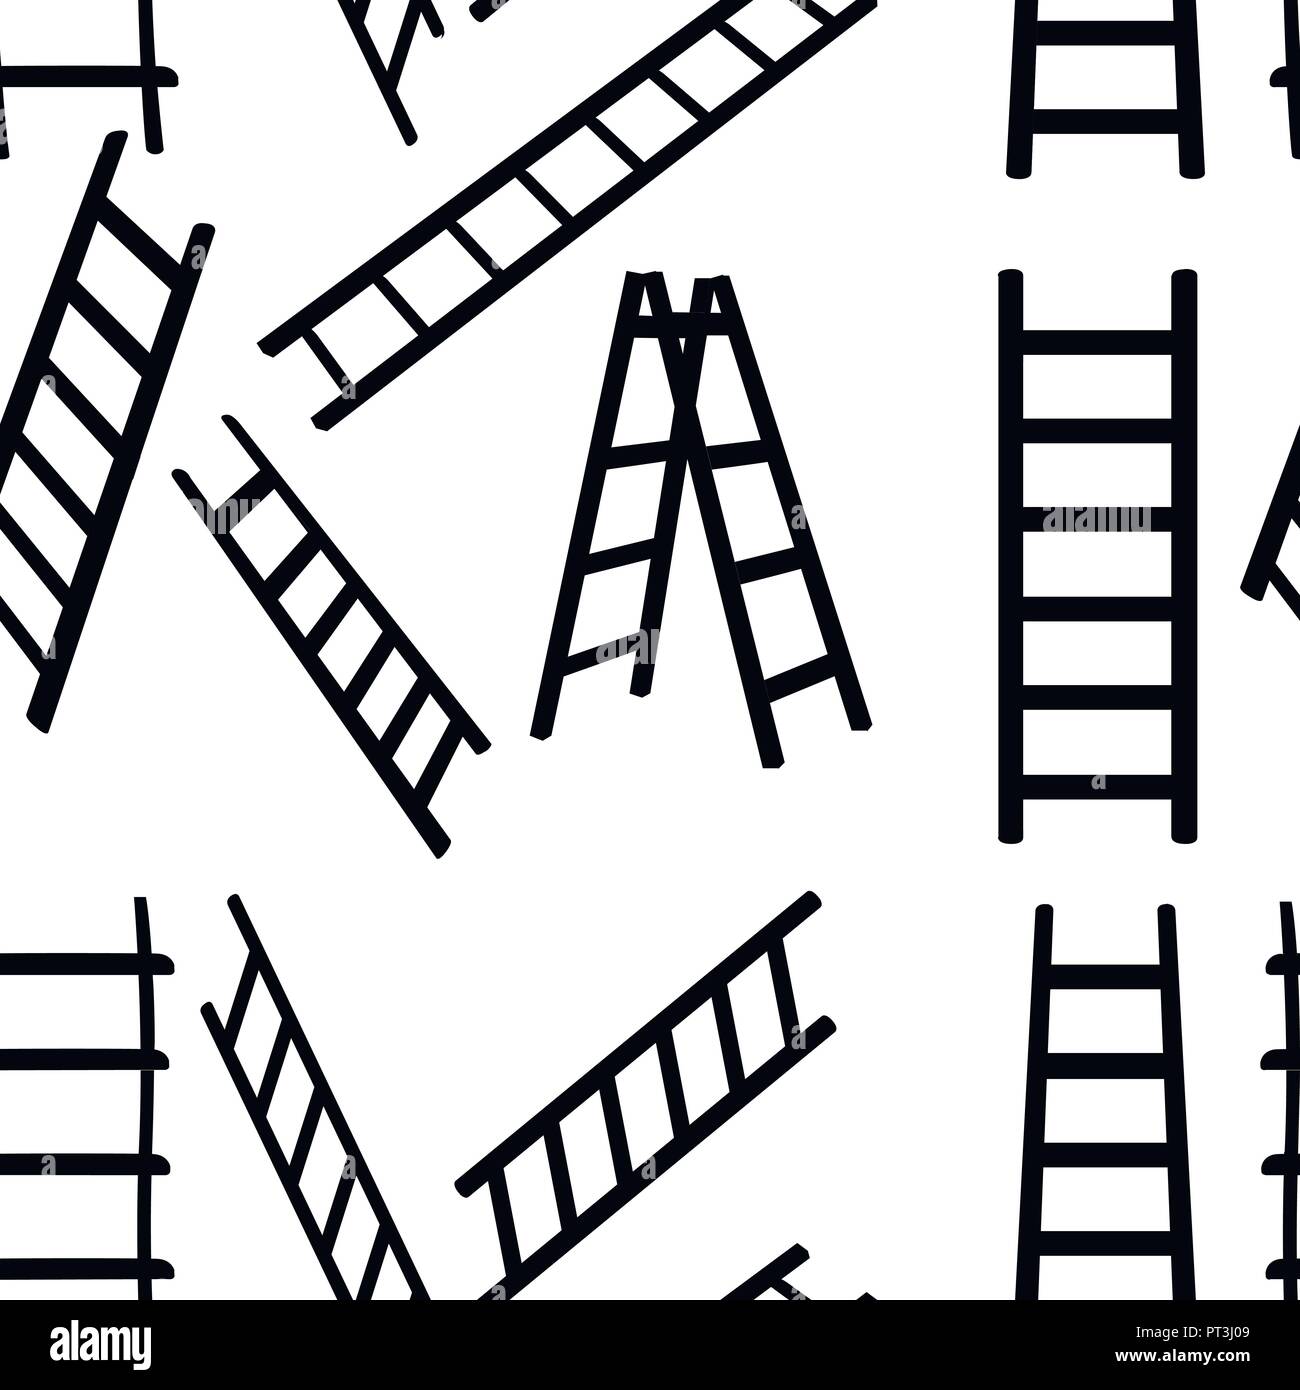 Seamless pattern. Black silhouette. Collection of metal ladders. Different types of stepladders. Flat vector illustration on white background. Stock Vector